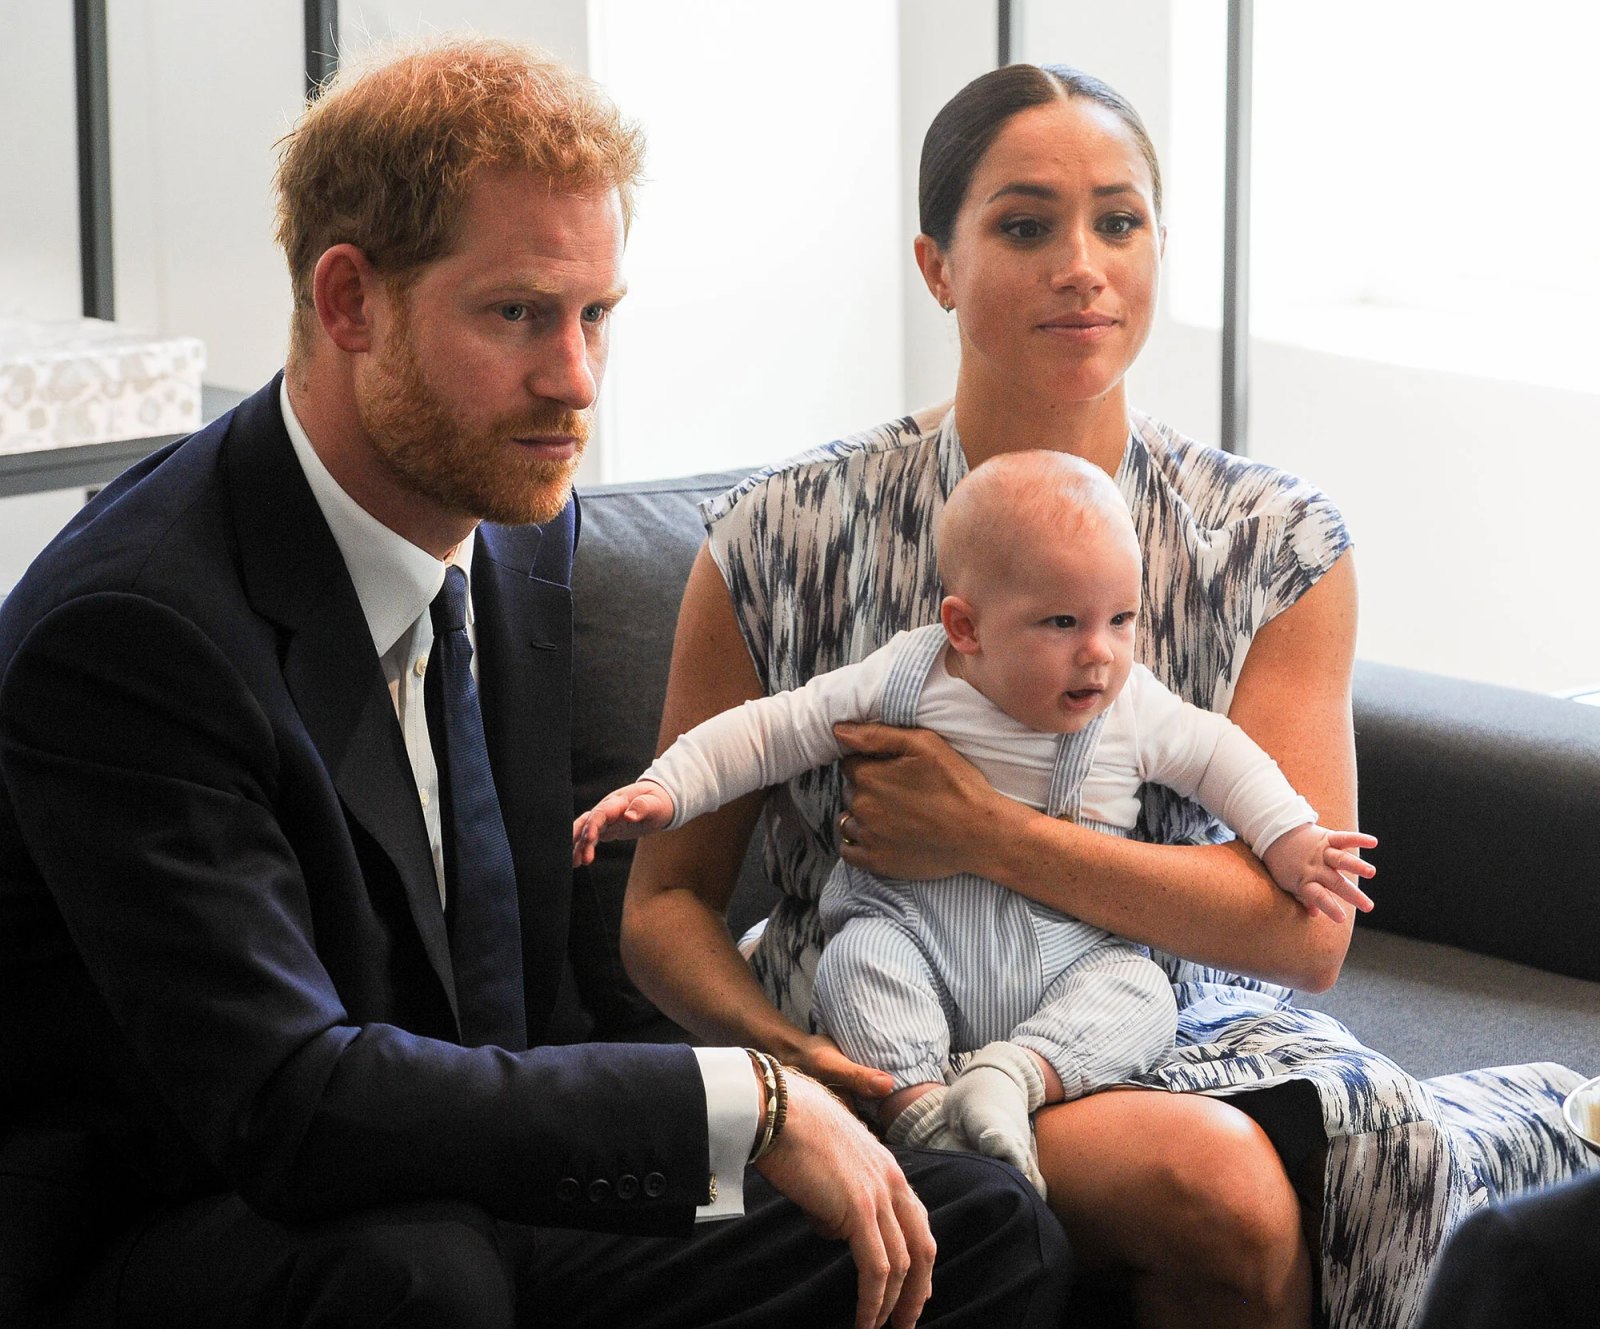 Prince Harry and Meghan Markle's Kids Archie and Lili Eligible for Royal Titles